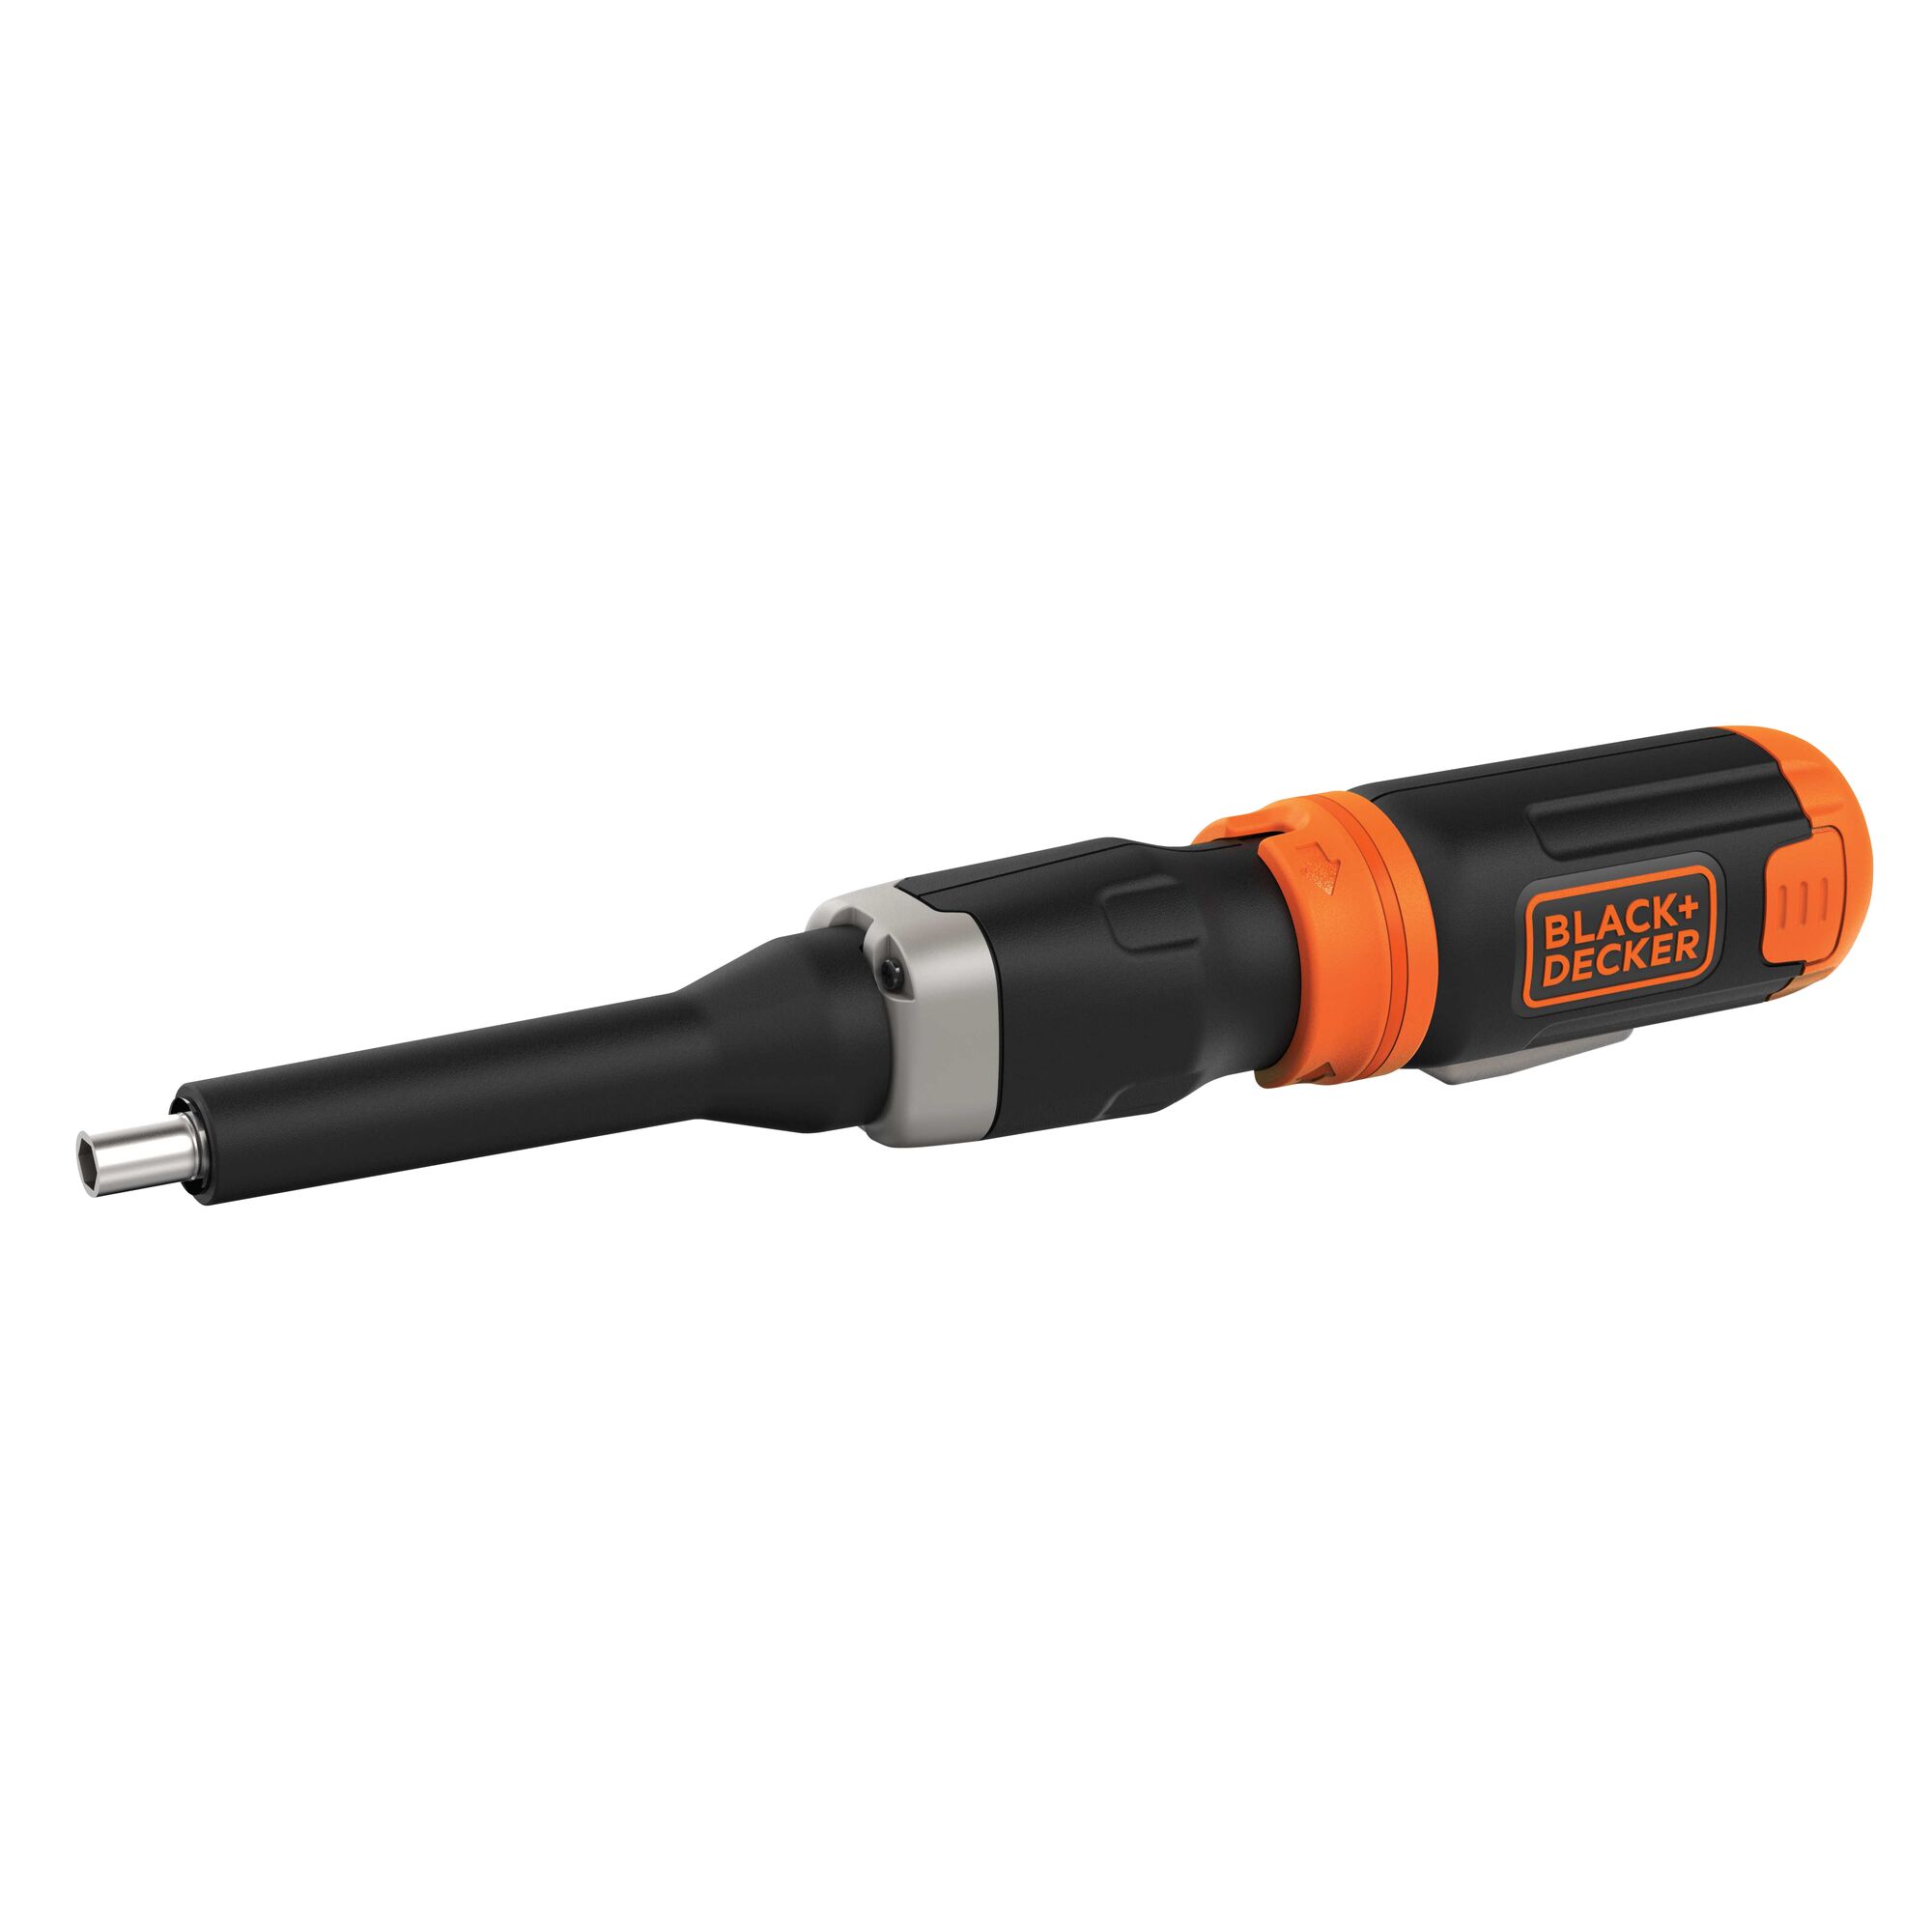 Cordless Power Driver Screwdriver with Extension Shaft.